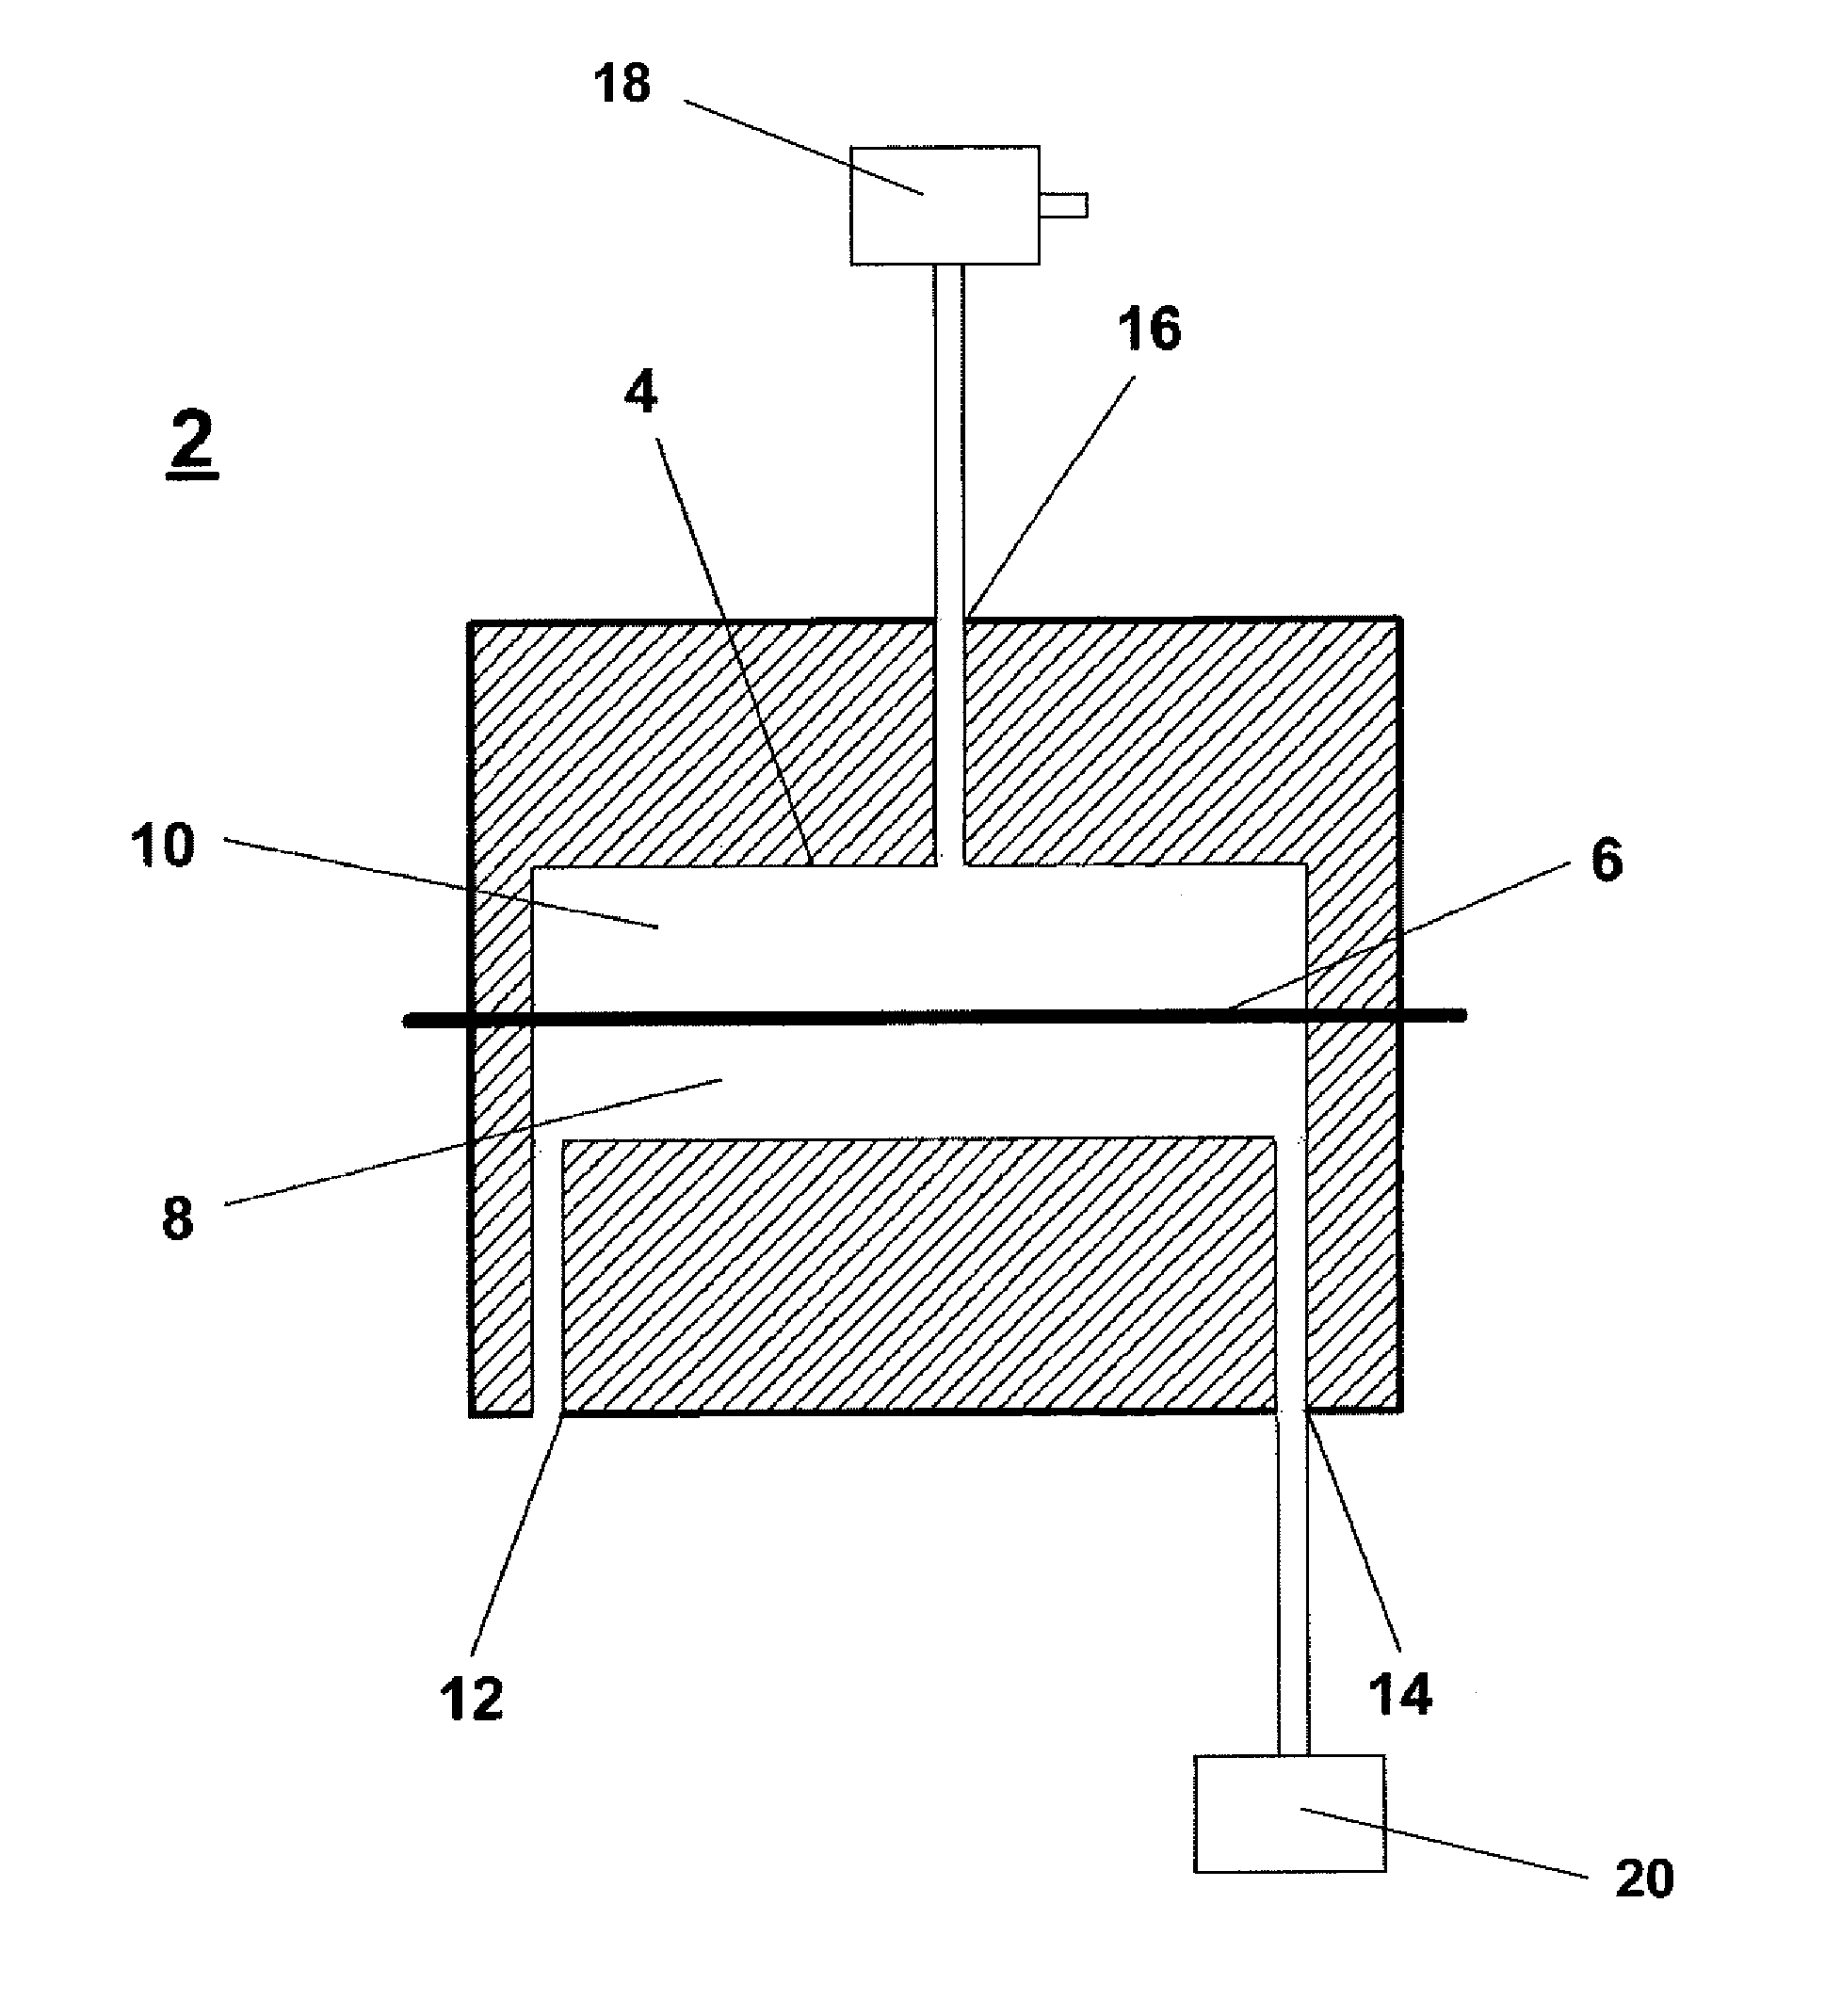 Method and apparatus for changing relative concentrations of gases present within a gaseous sample for mass spectrometry